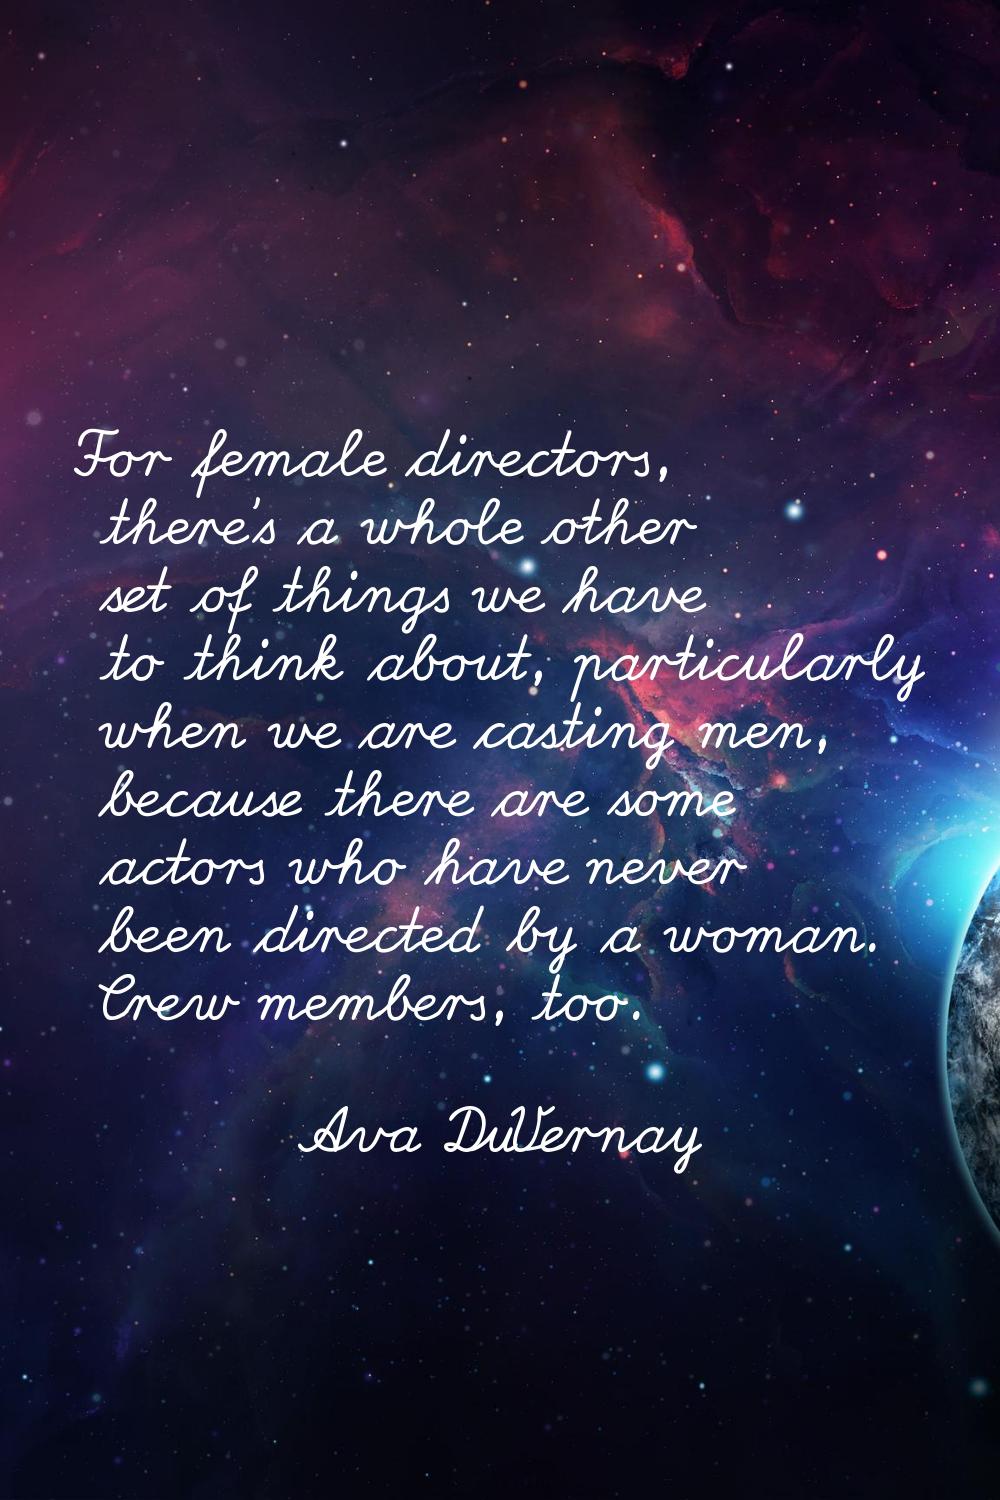 For female directors, there's a whole other set of things we have to think about, particularly when